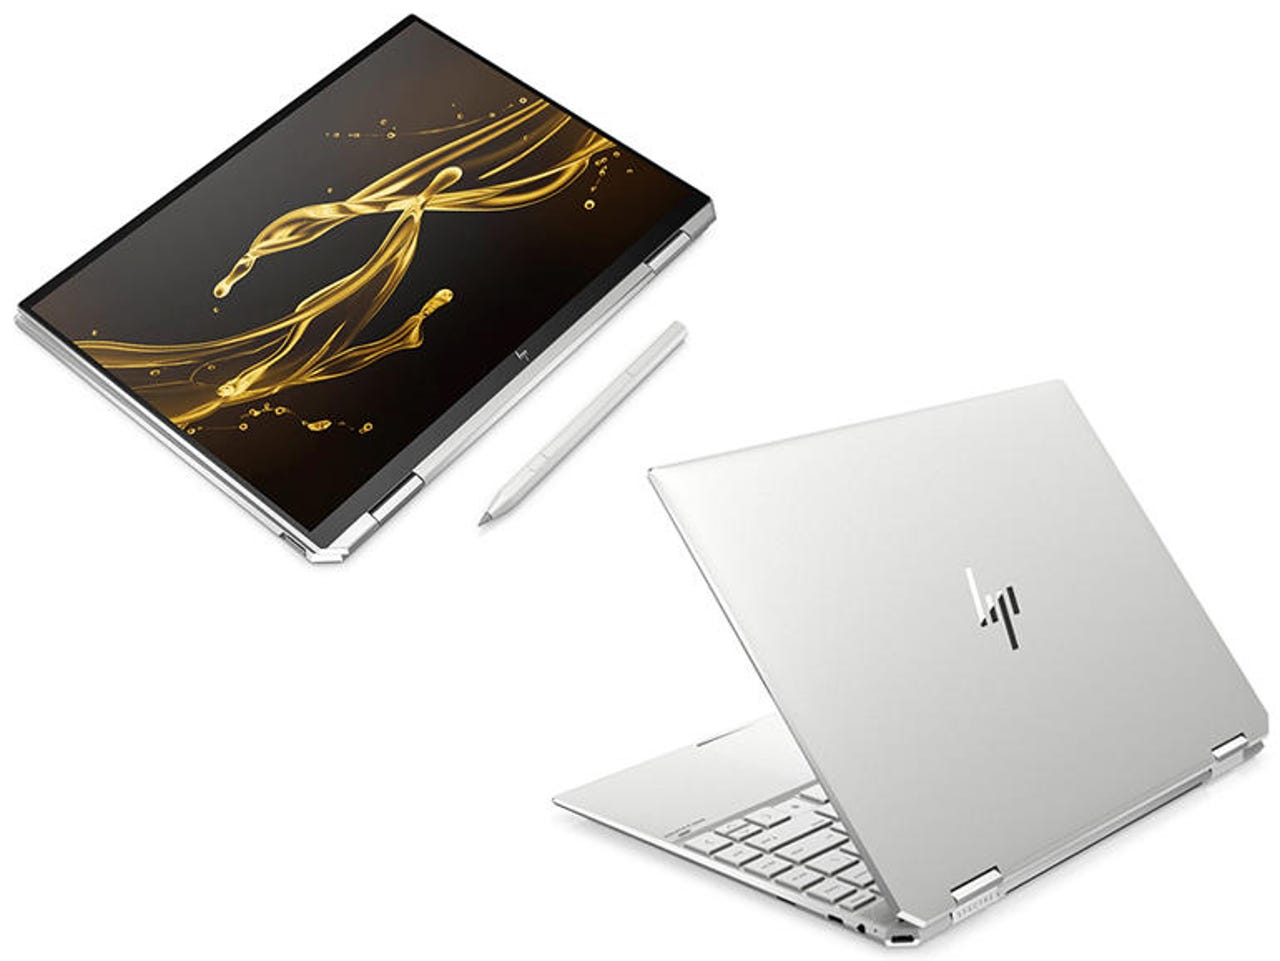 HP Spectre x360 14 2-in-1 Reviews, Pros and Cons